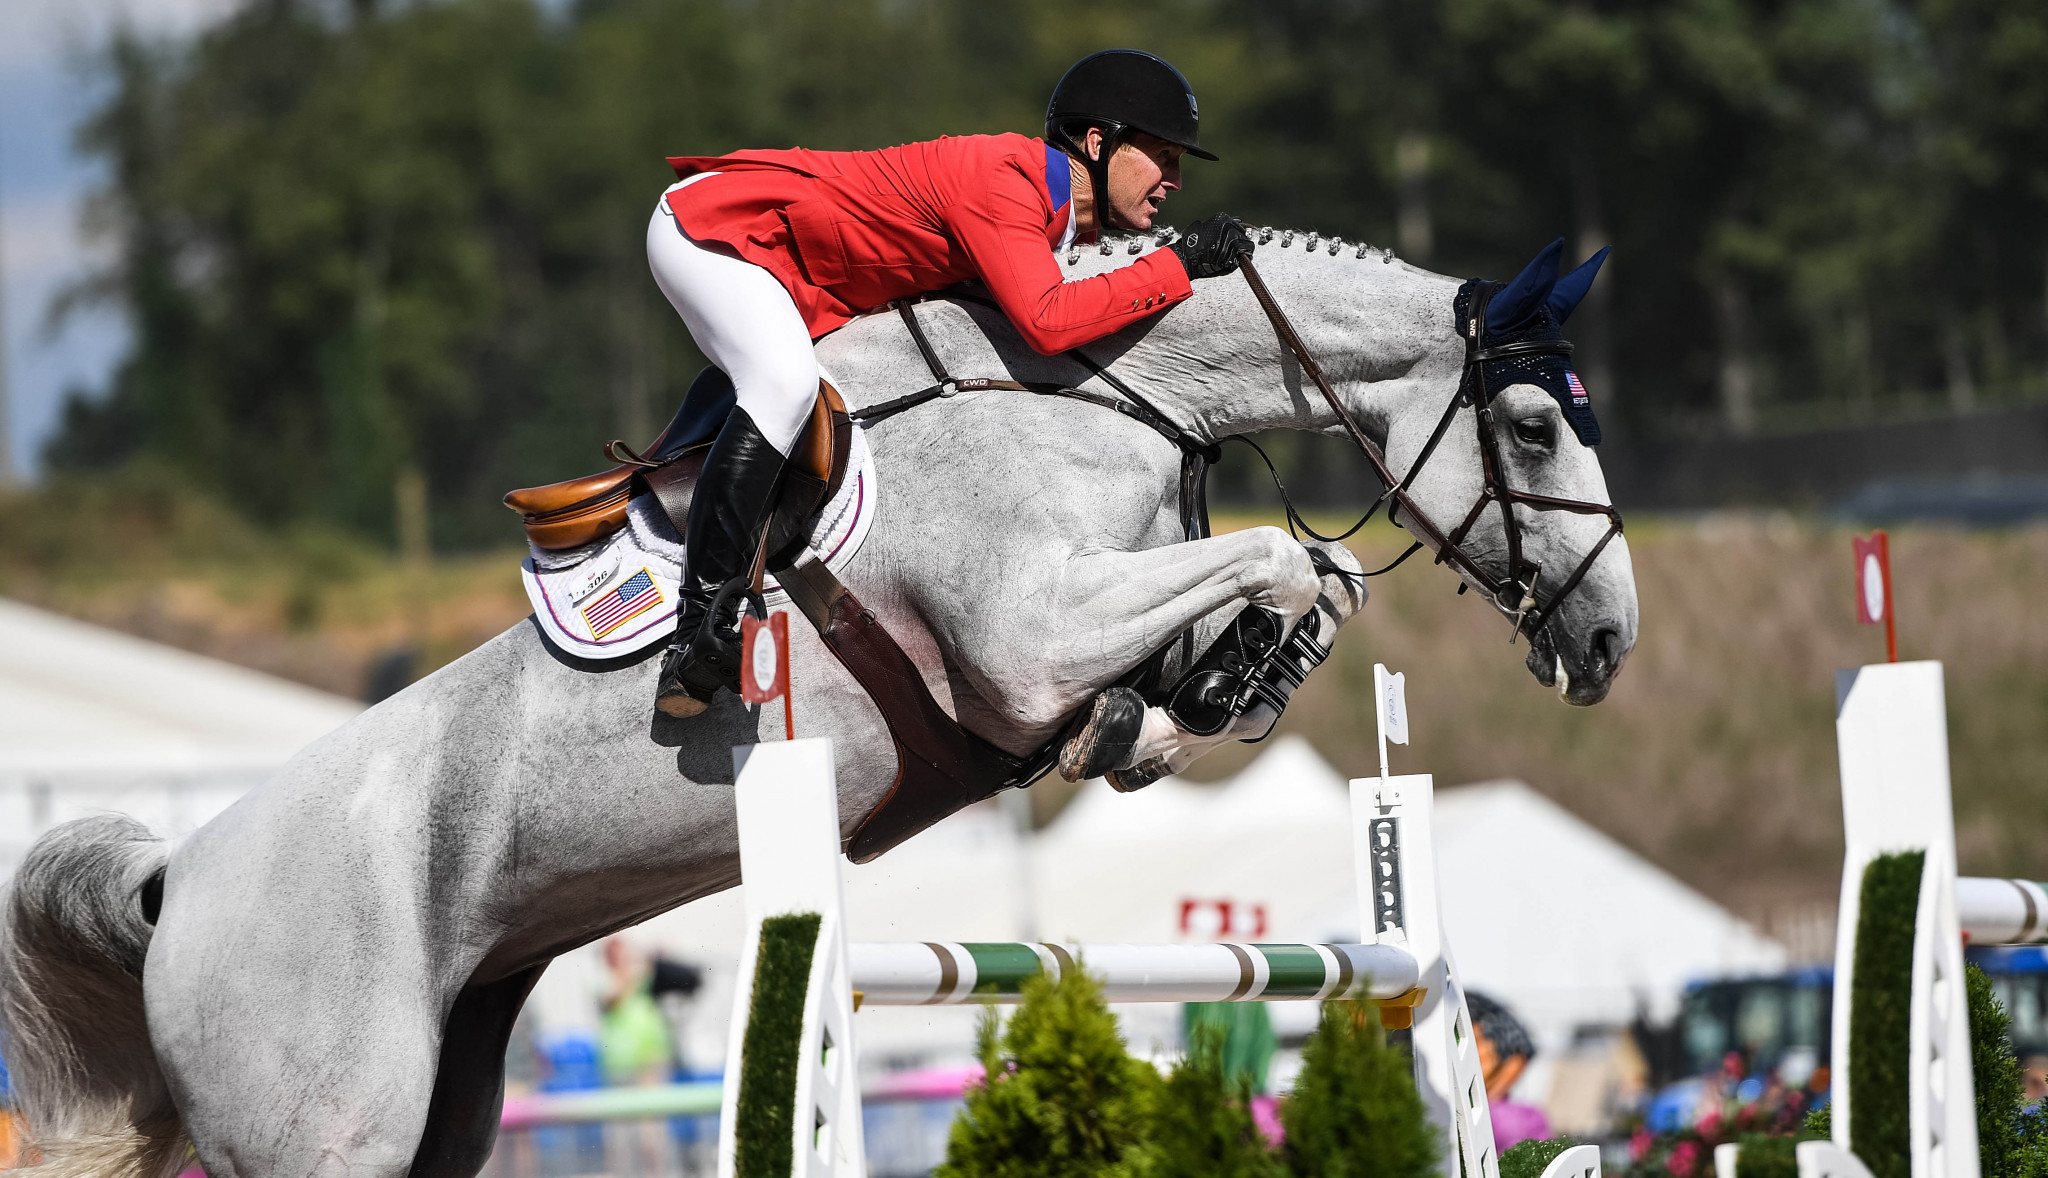 US hosts move up to challenge Switzerland in team jumping at FEI World Equestrian Games